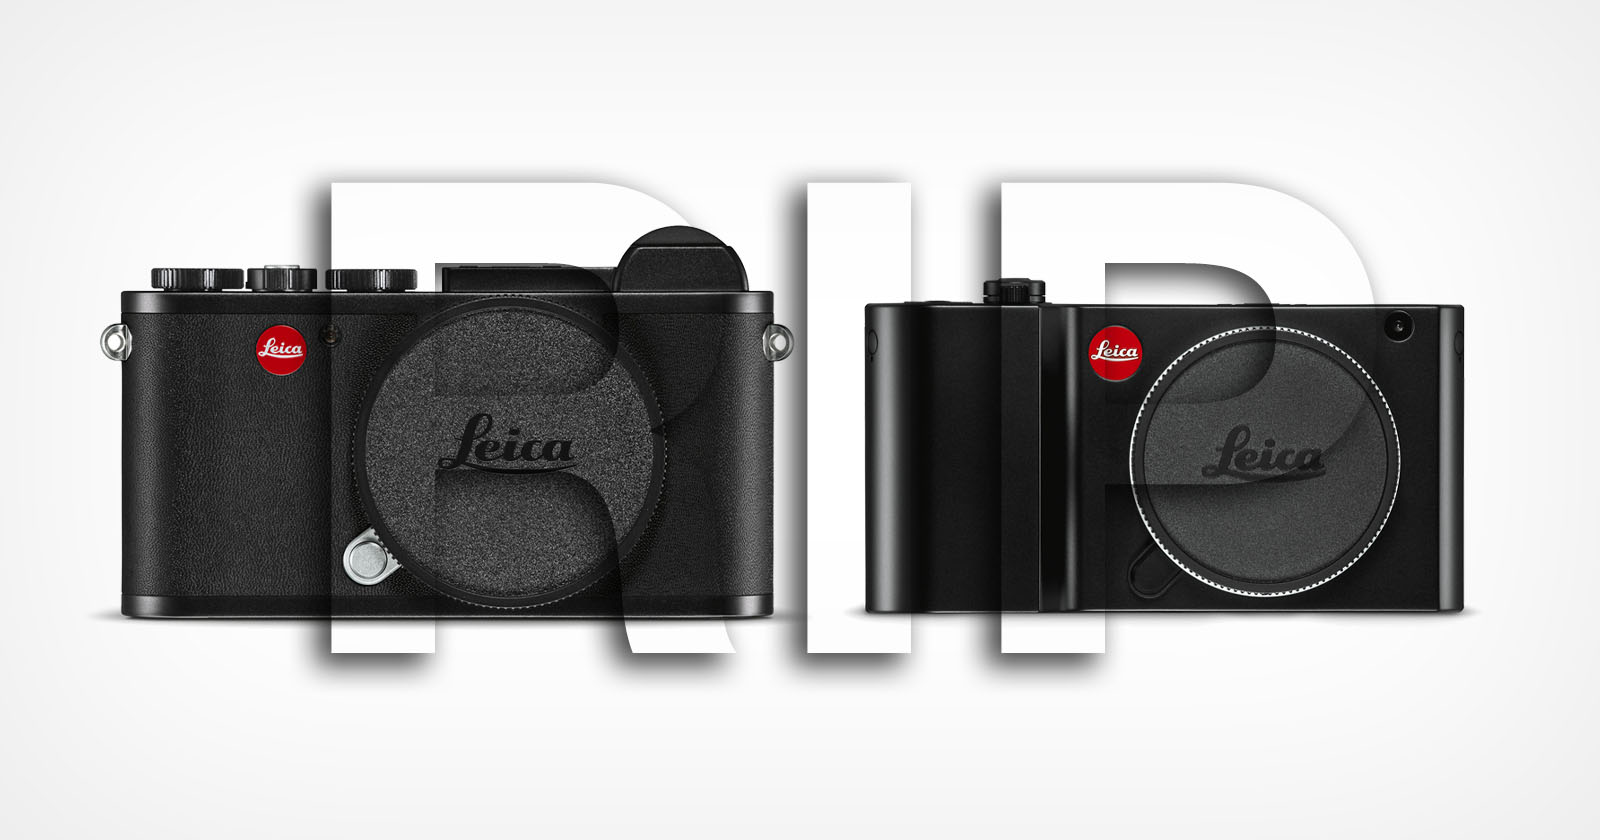 Leica Discontinues the CL and TL2 Cameras